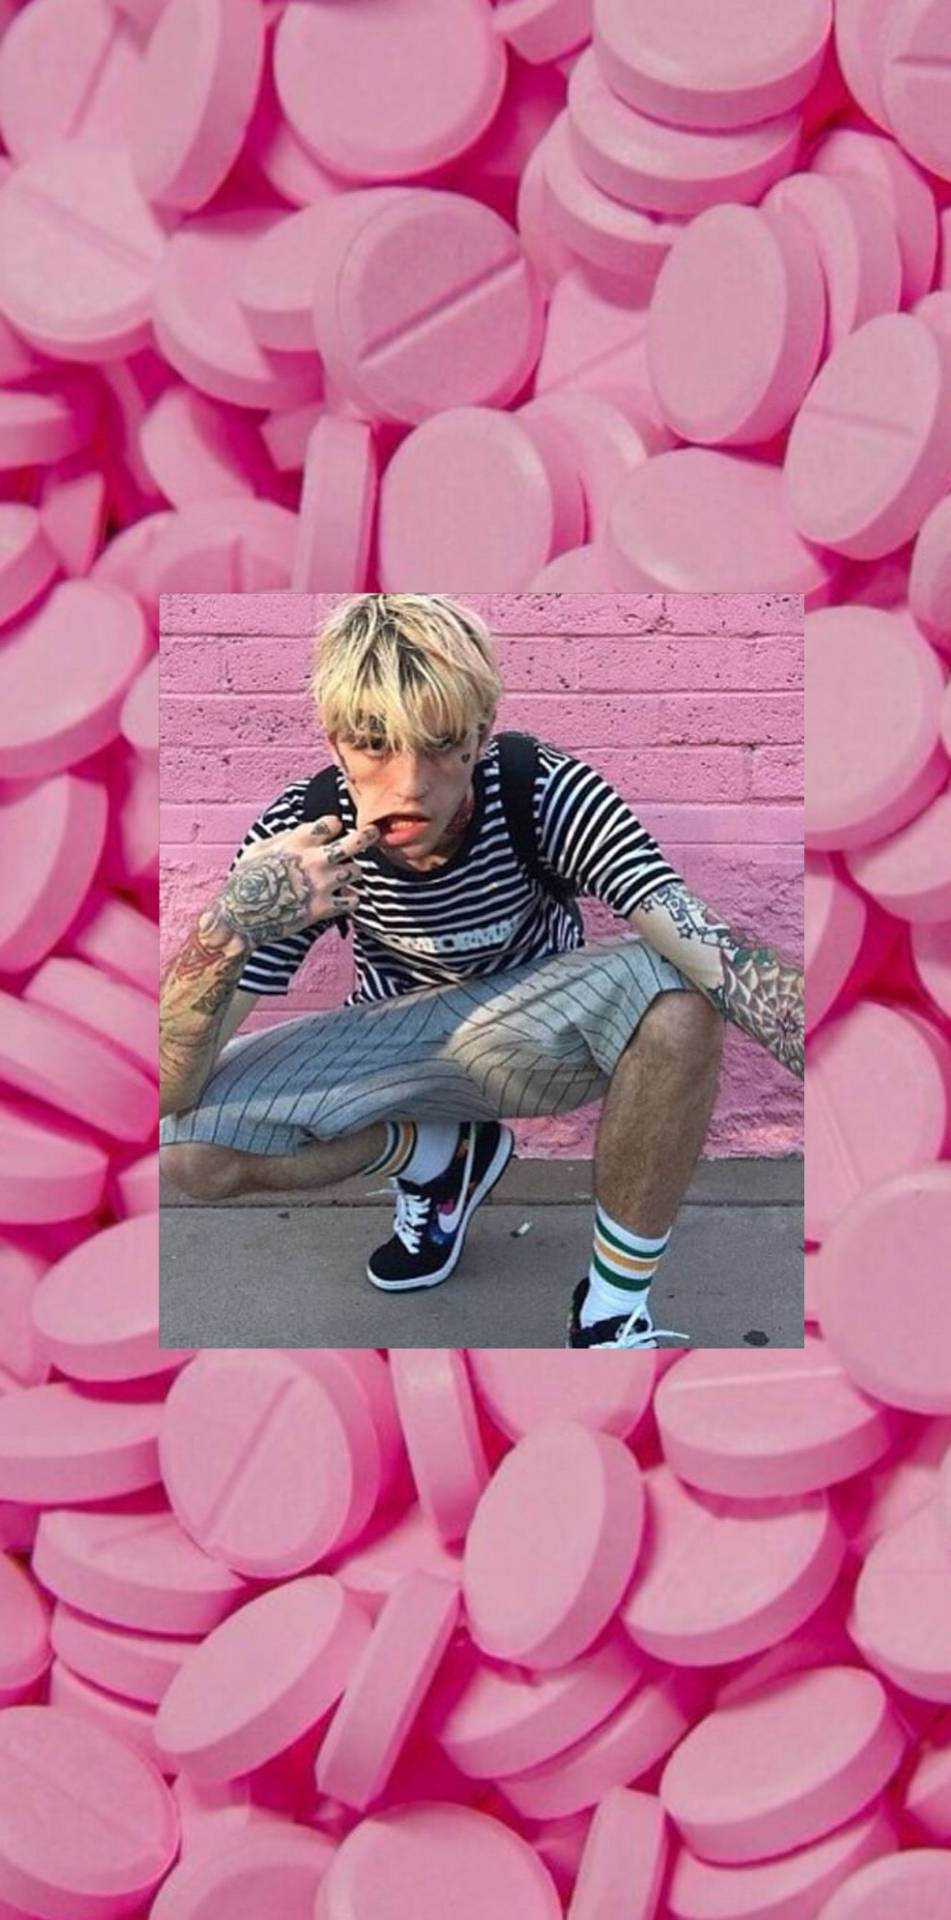 "Lil Peep: a pink aesthetic vision of rap music and drugs." Wallpaper